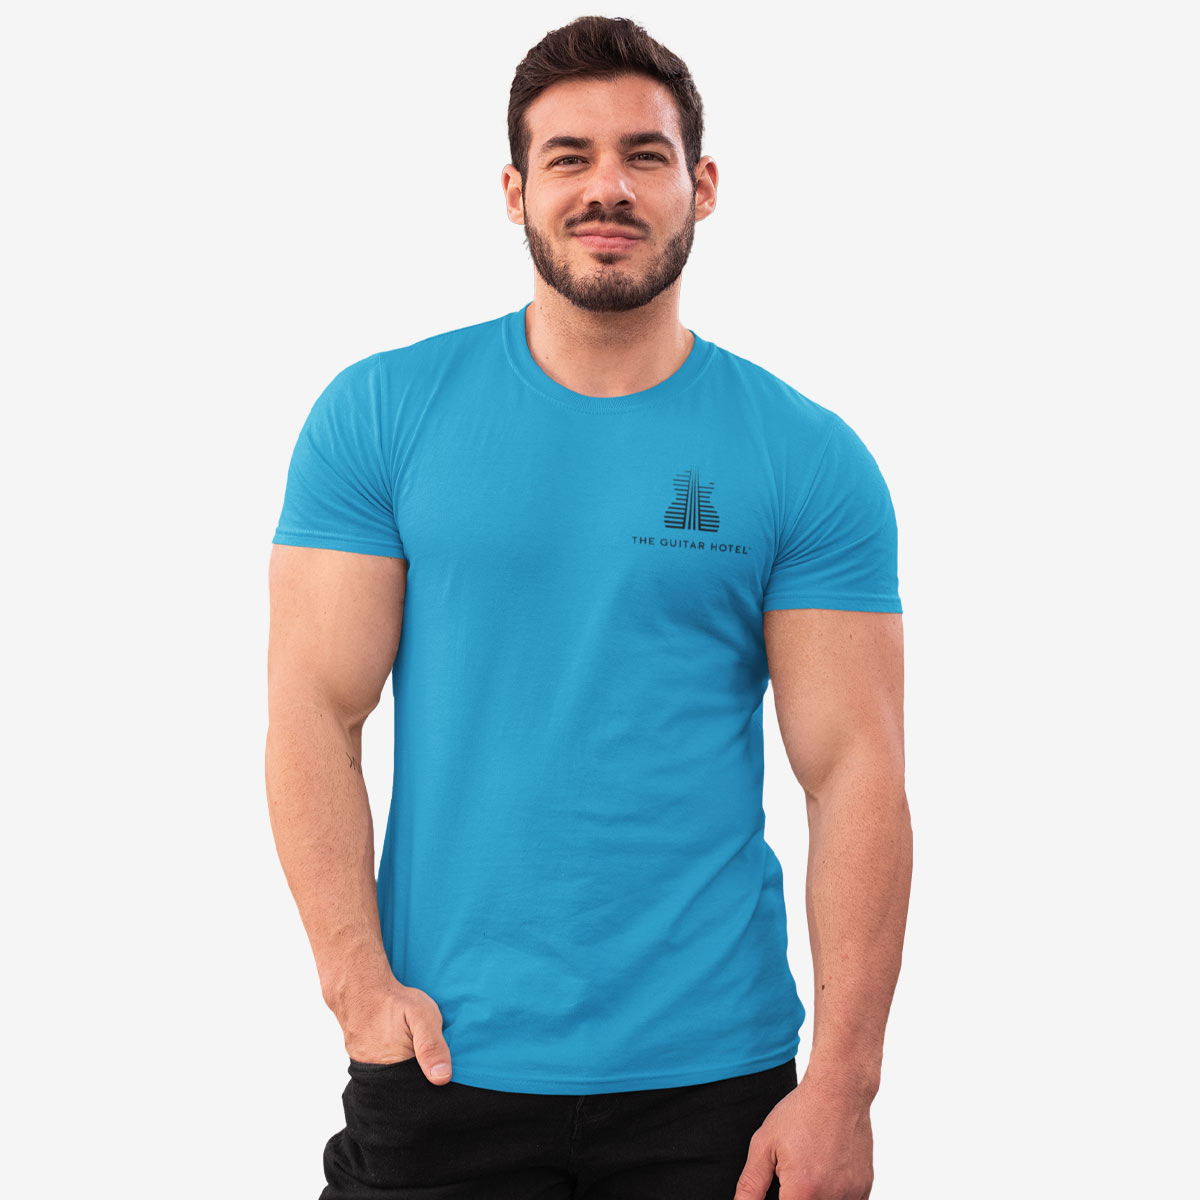 Guitar Hotel Adult Fit Tee in Aqua with Reflection Design image number 3